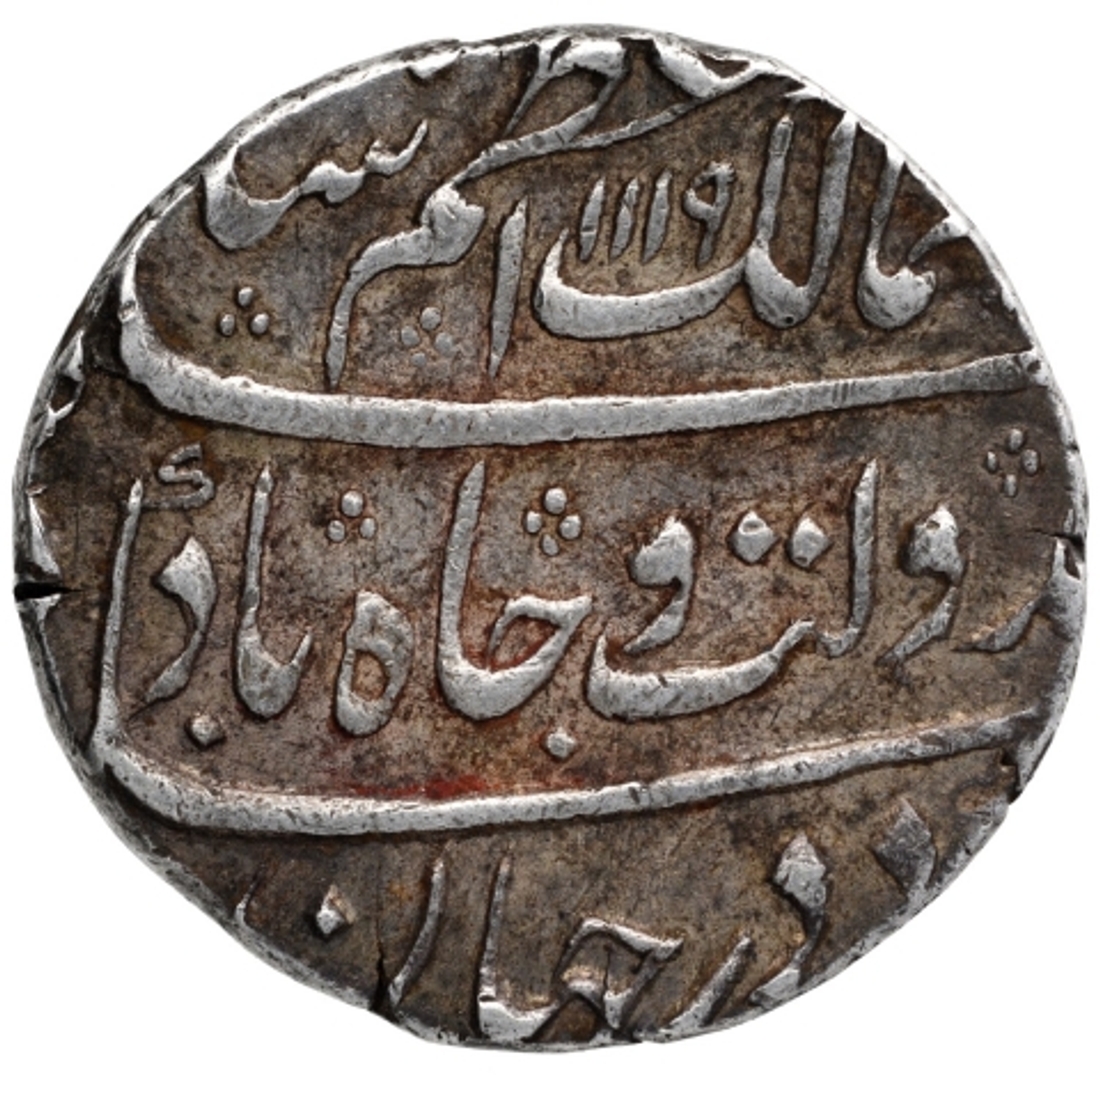 Silver One Rupee Coin of Azam Shah of Surat Mint.